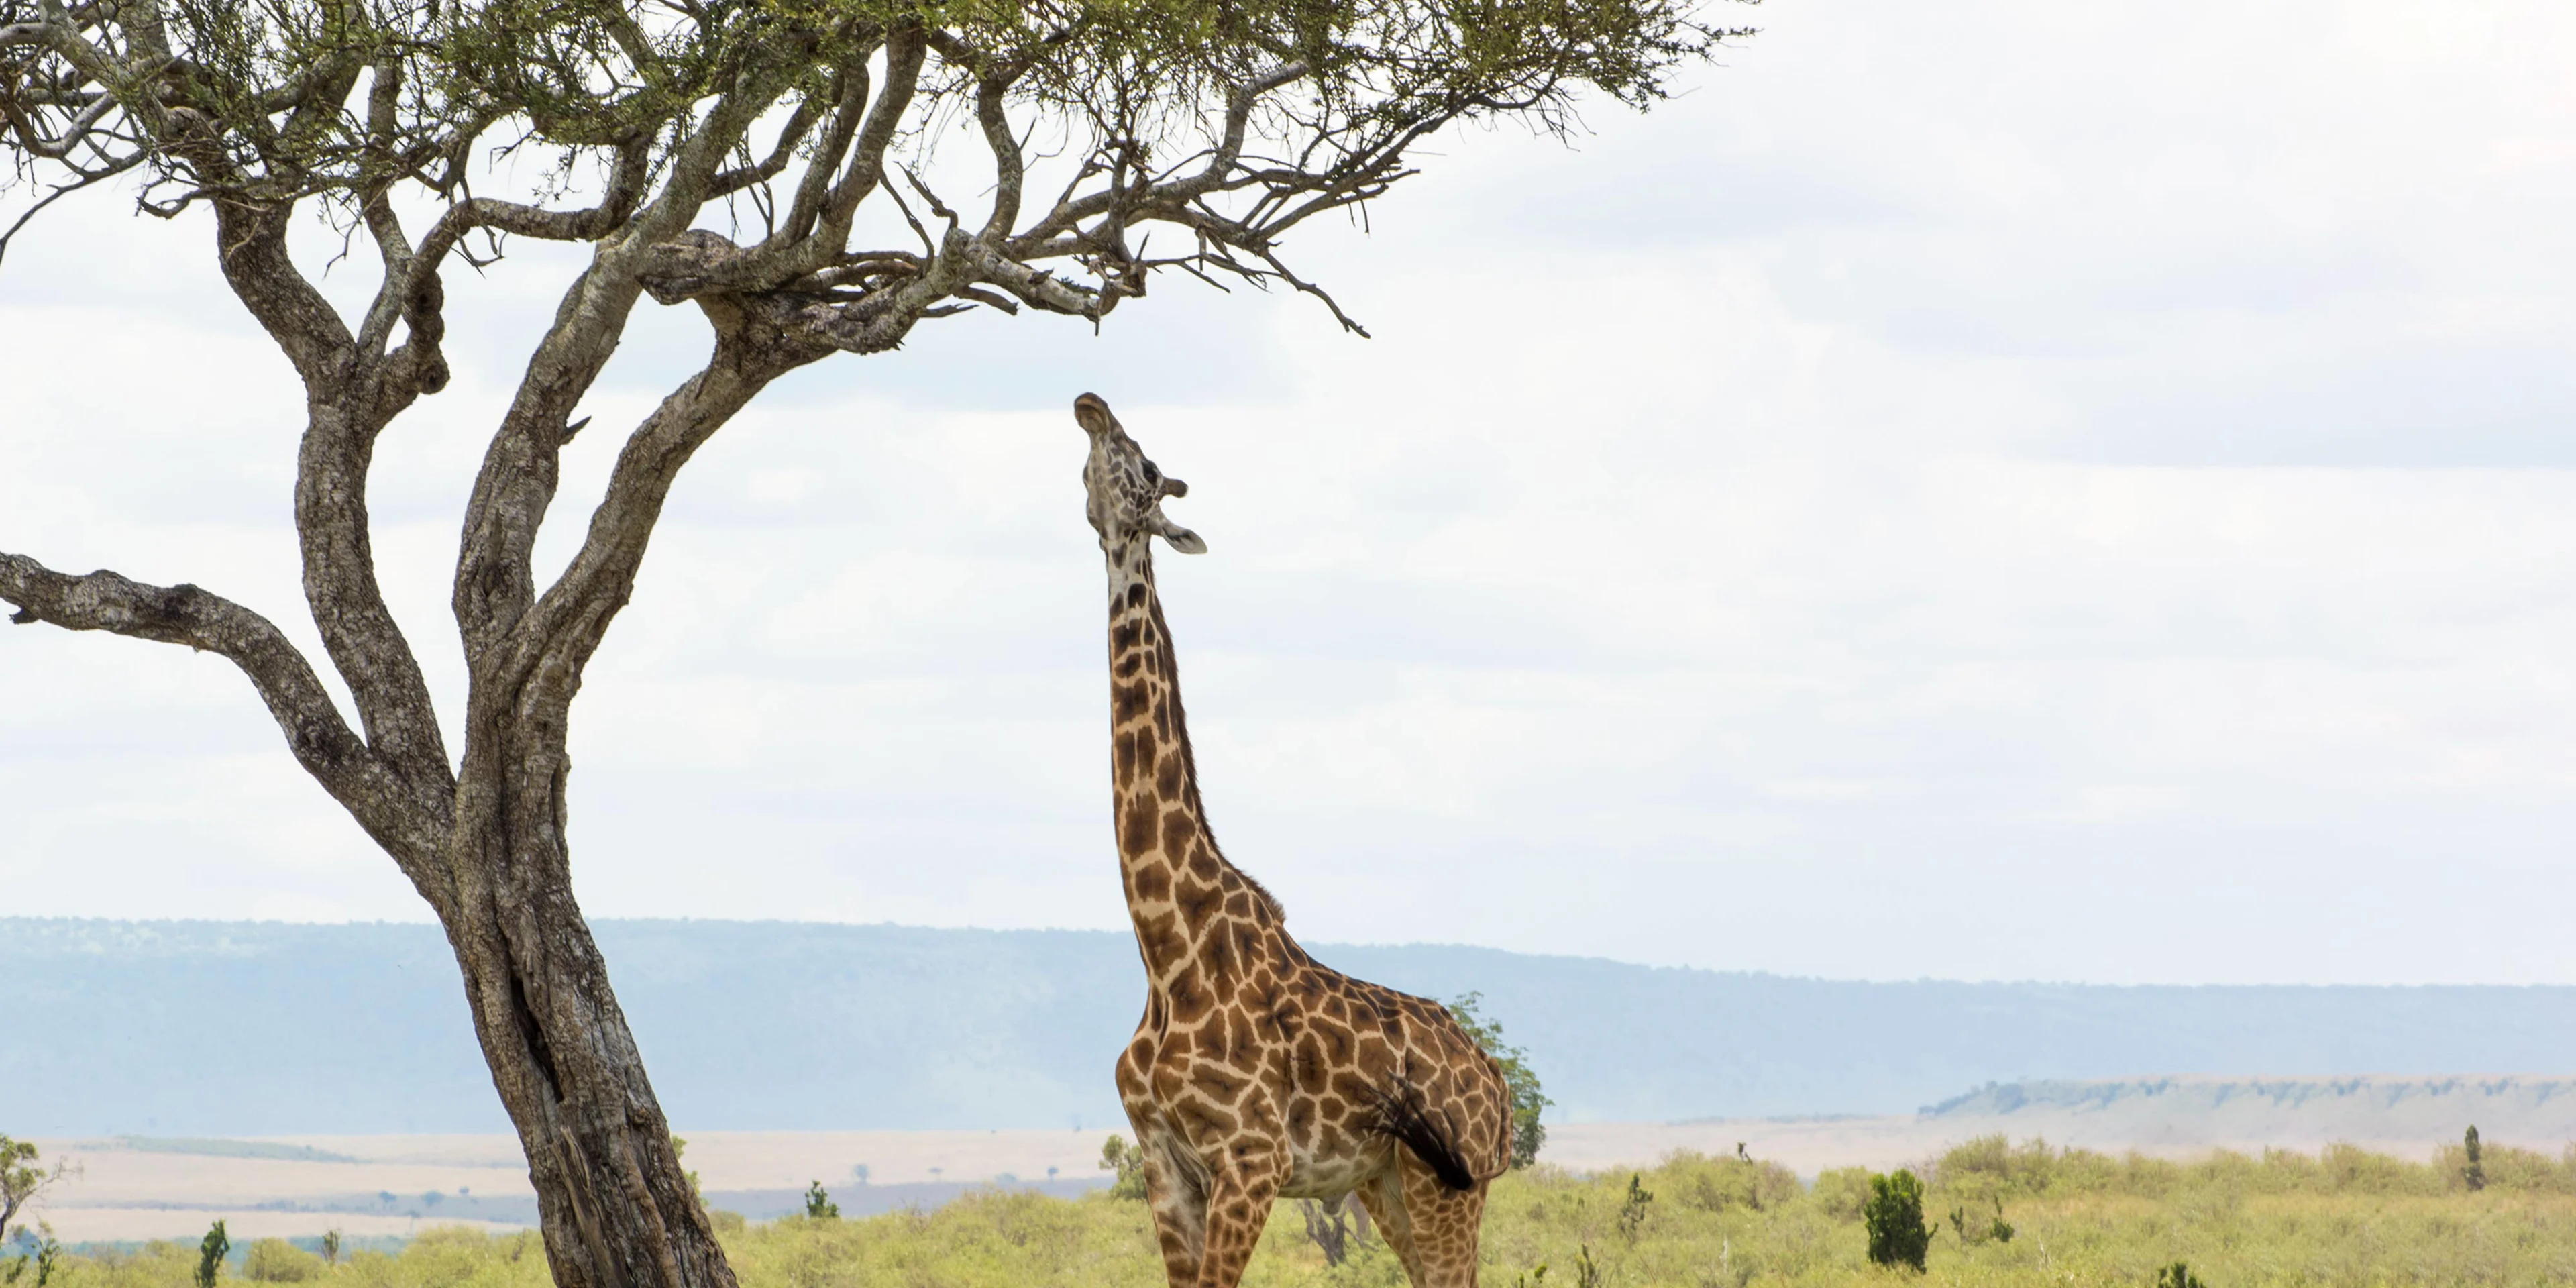 A giraffe reaching for leaves in a tree